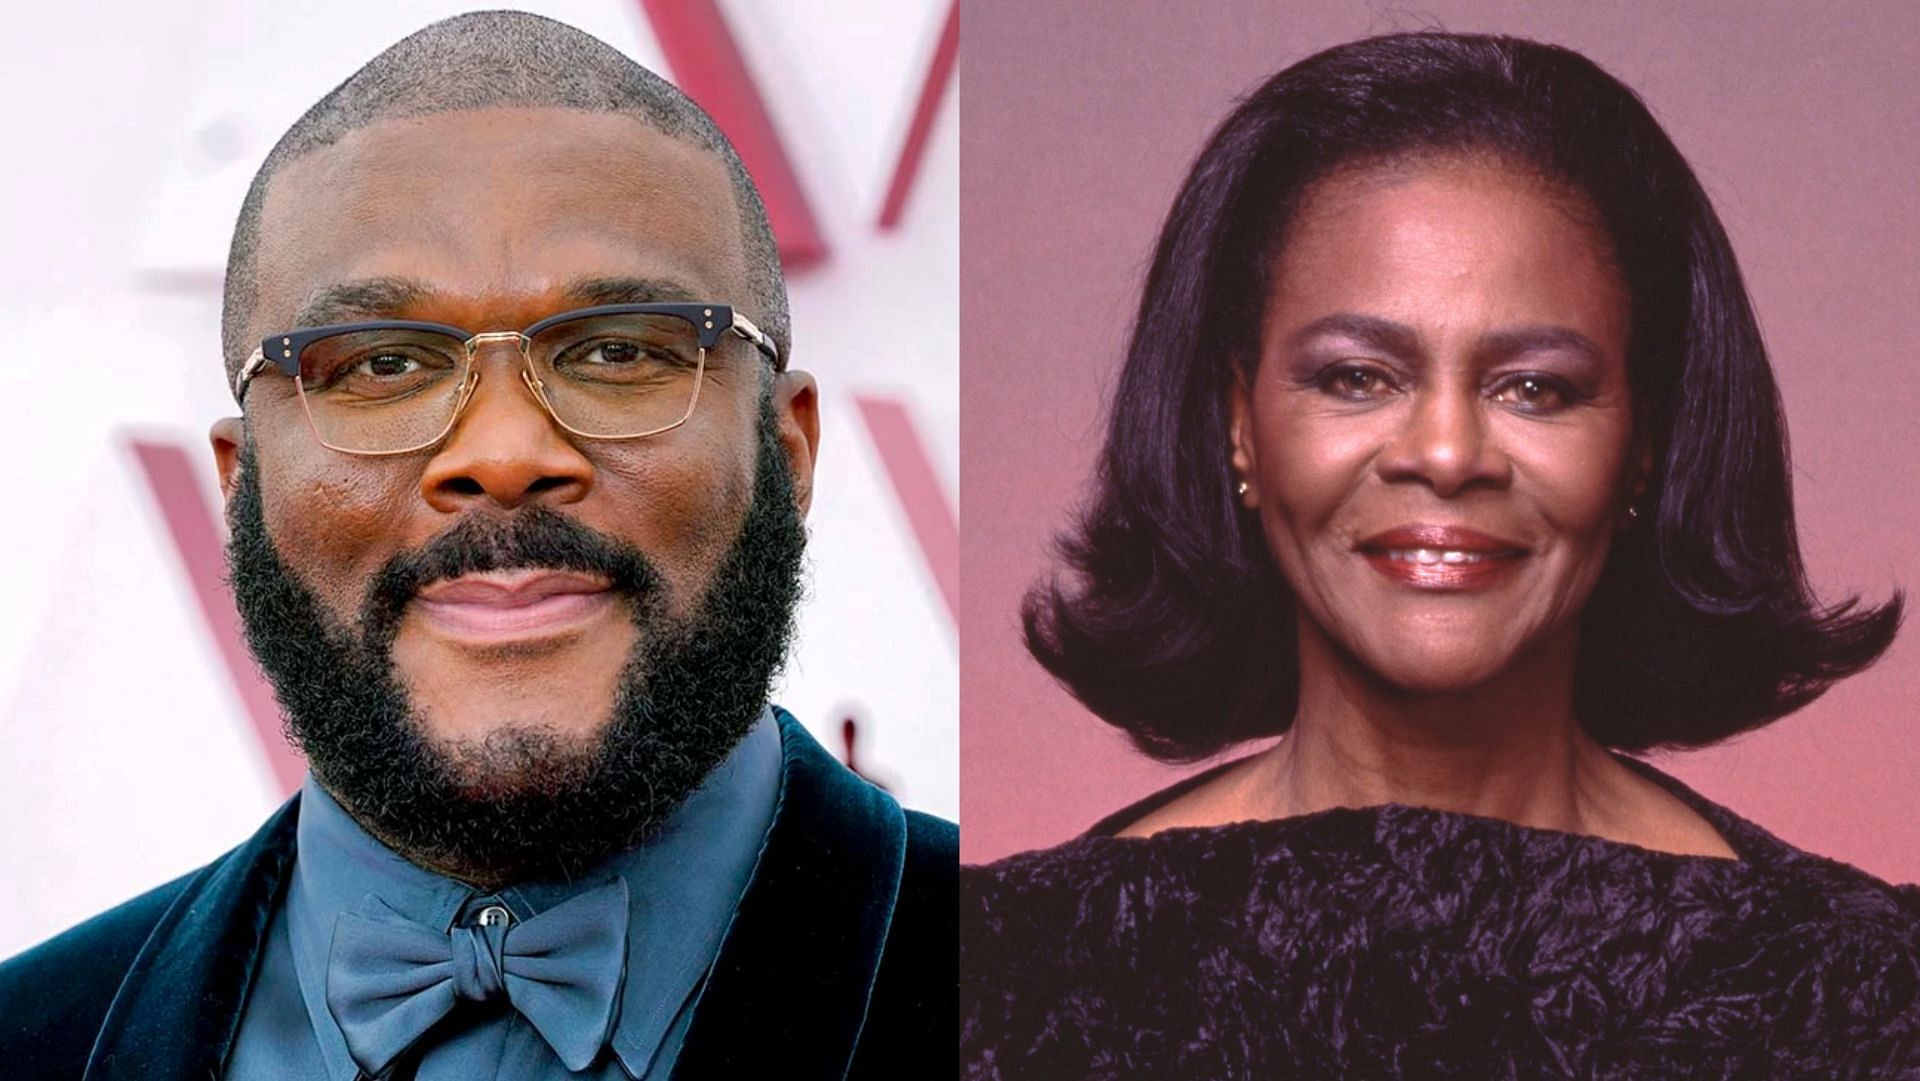 Cicely Tyson and Tyler Perry worked together in several films. (Image via Pool/Getty, Jack Mitchell/Getty)